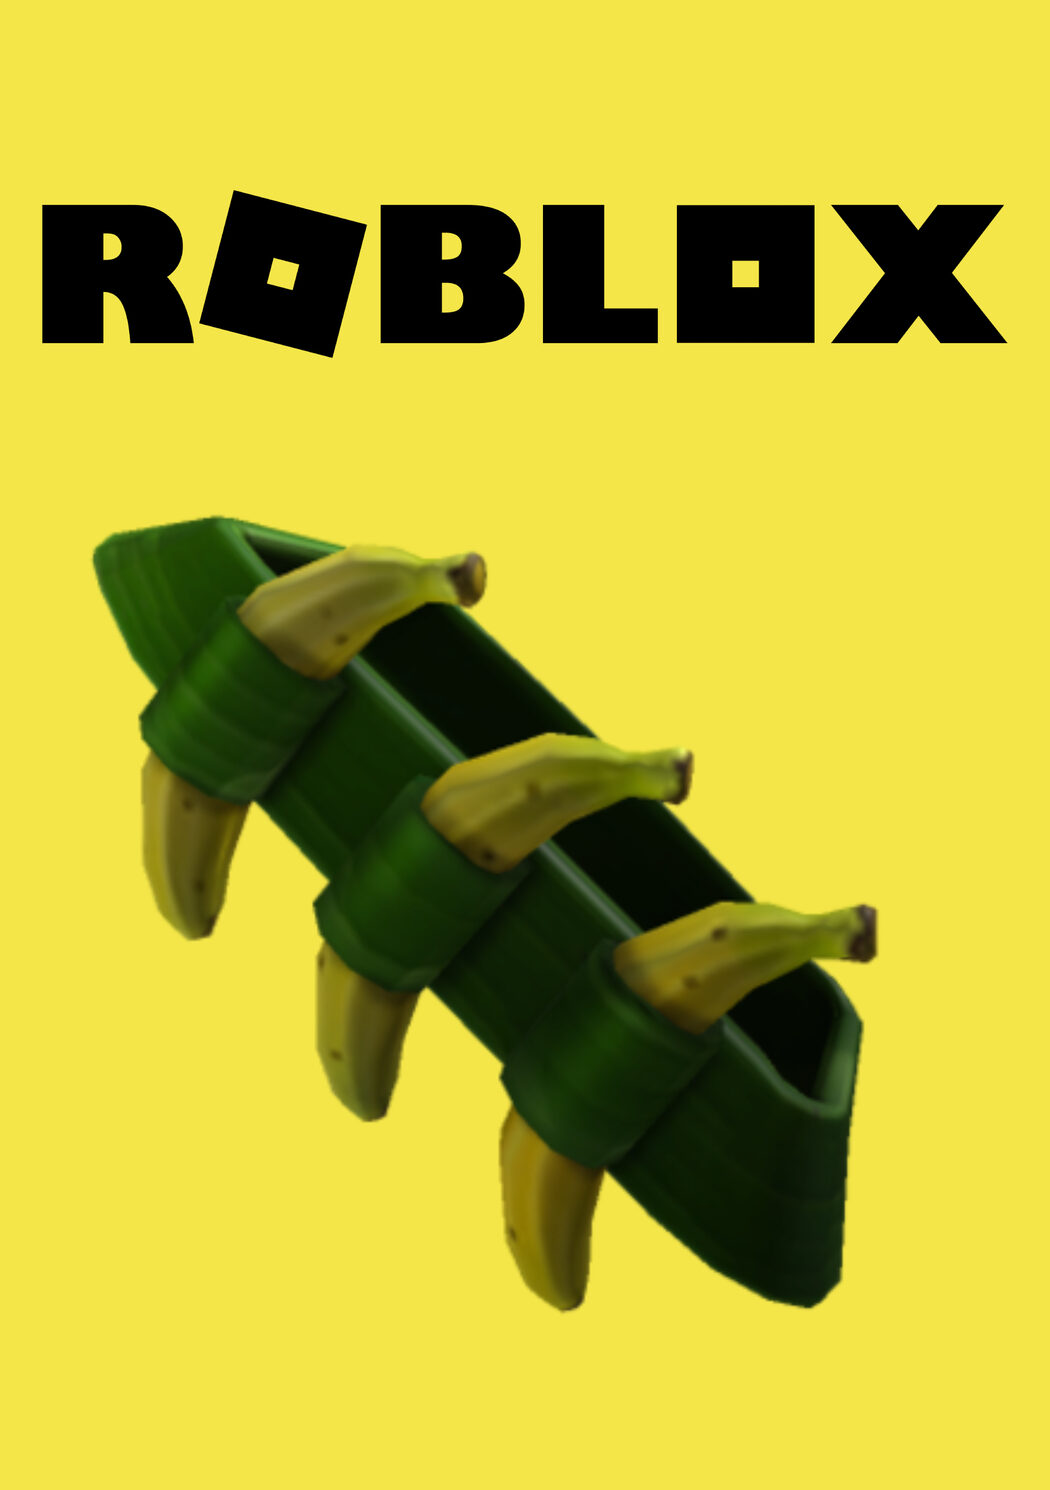 Roblox Exclusive Banandolier Skin DLC Official Key